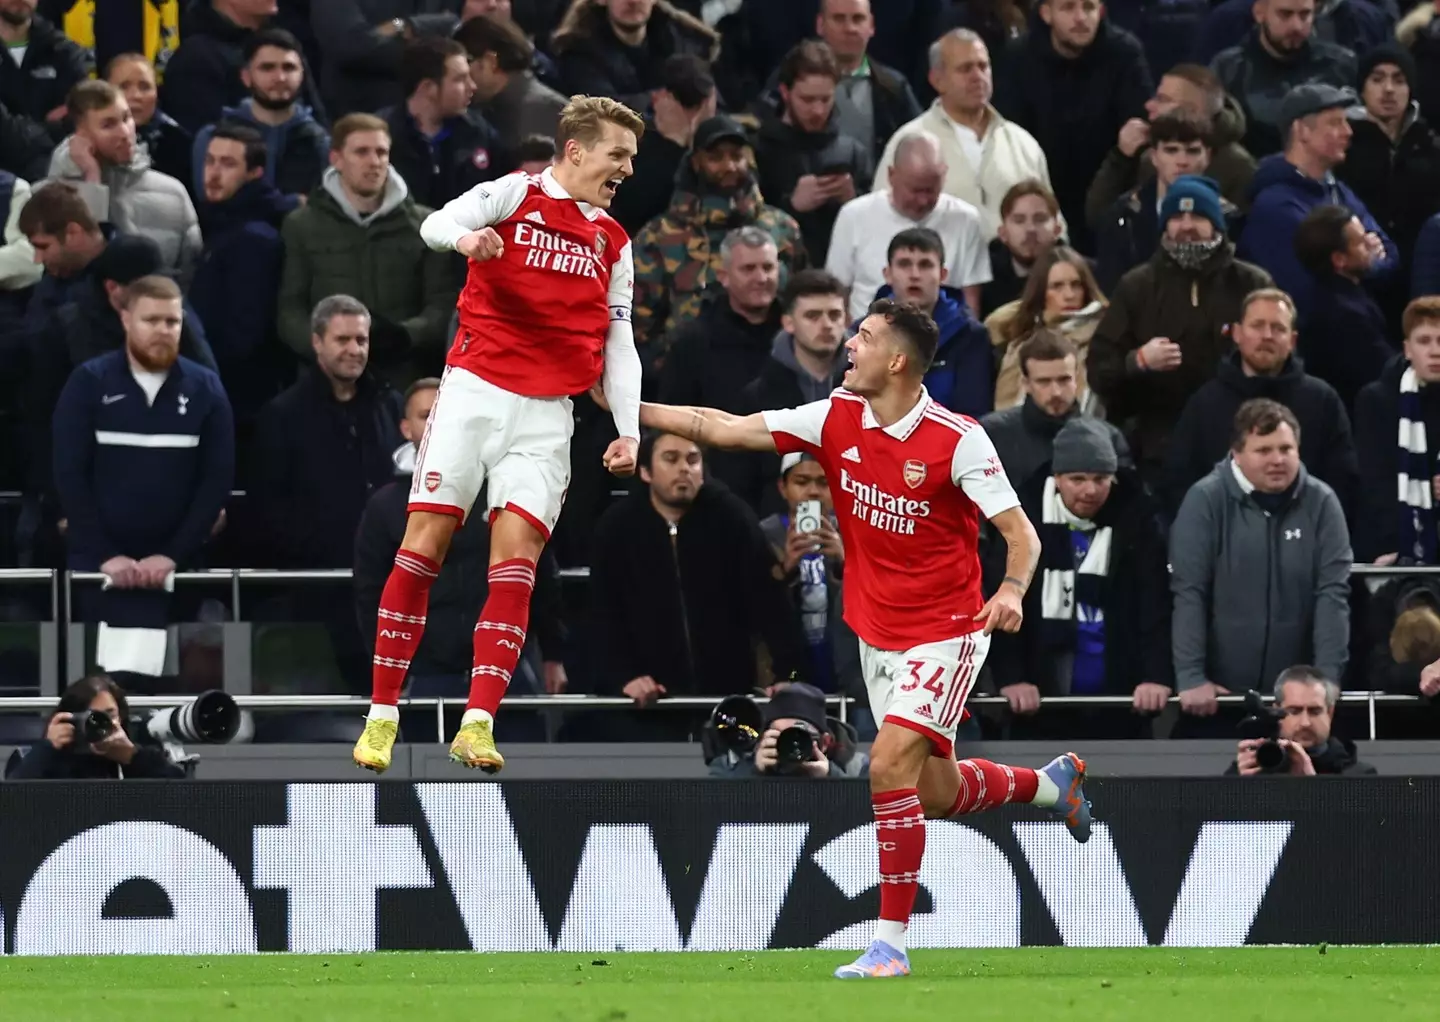 Many Arsenal fans joked that the fan wouldn't have dared to kick Granit Xhaka, who can be seen here celebrating his side's second goal. (Image